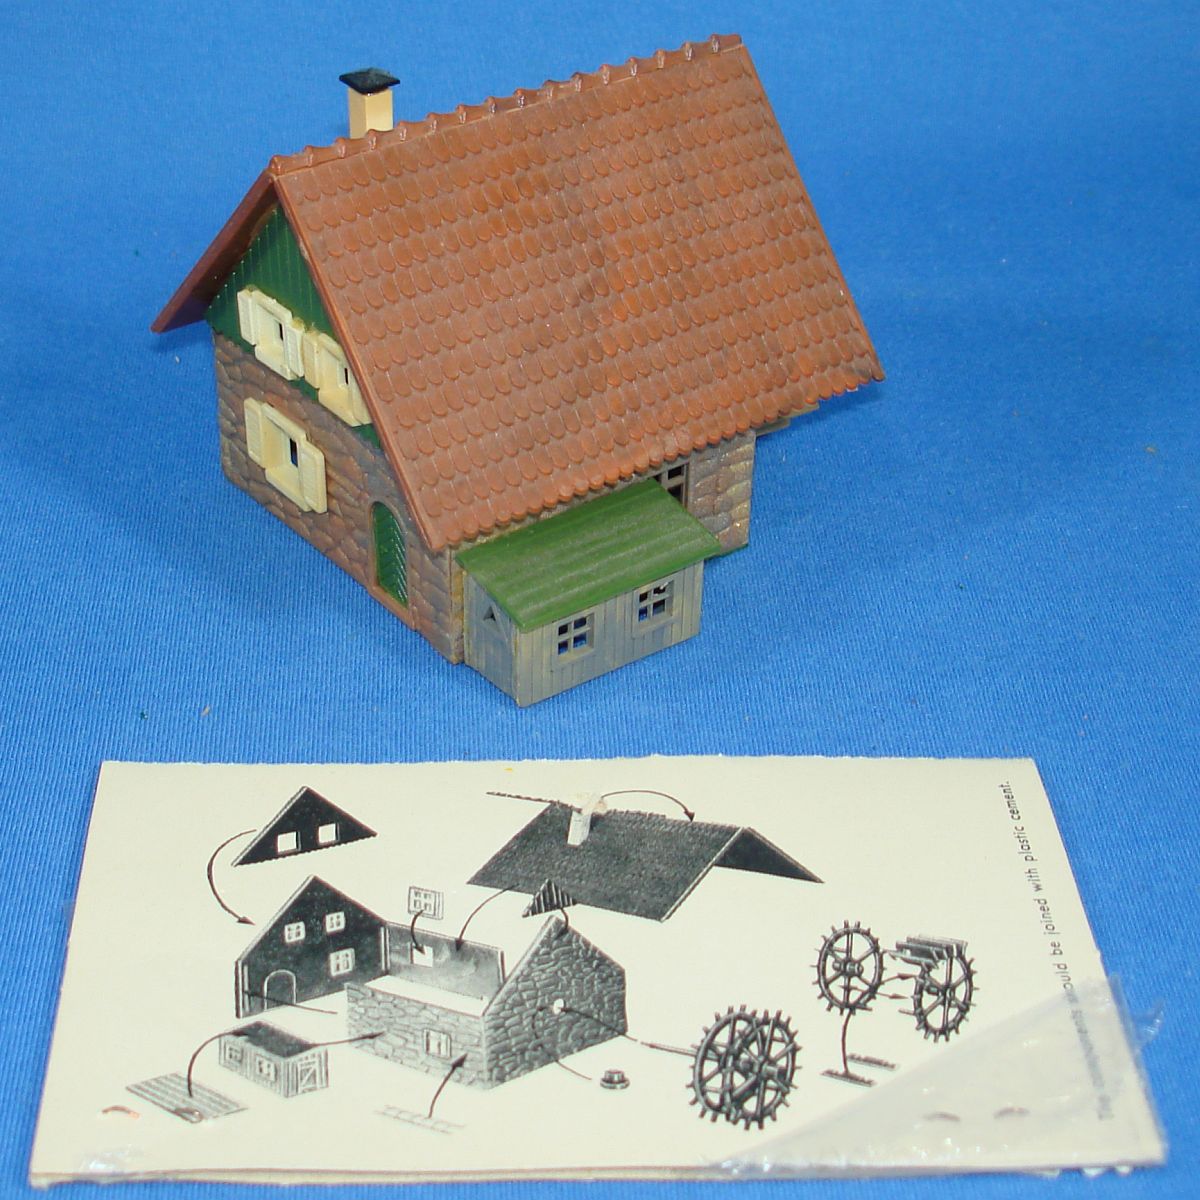 Faller Kaybee Kramer Brothers Trackside Structures HO Scale Assembly Kit Water Mill 6227 Instructions